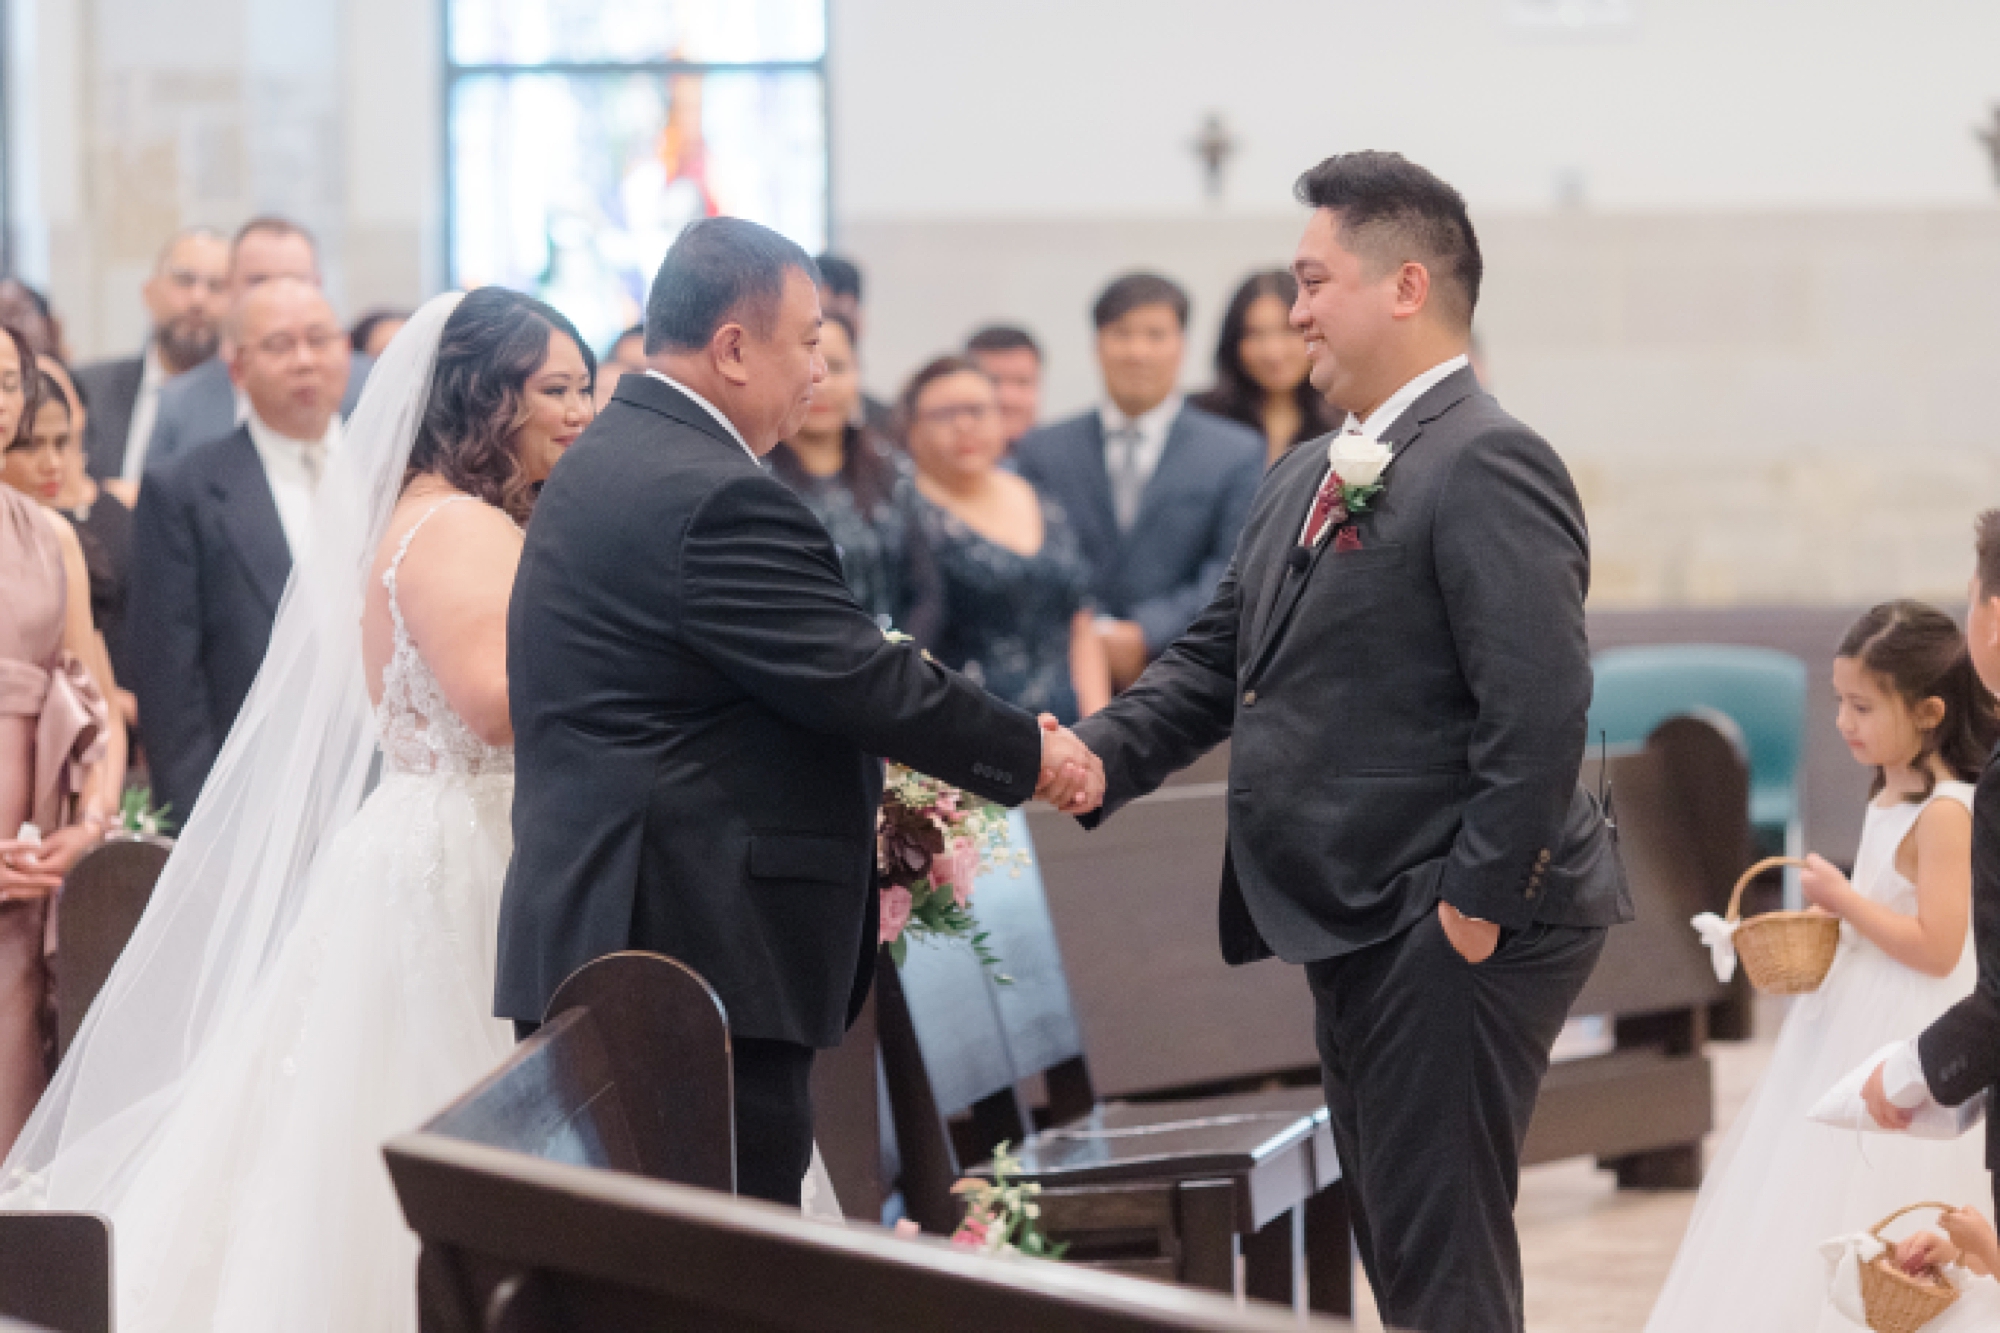 groom shakes bride's father's hand during wedding ceremony at St. Francis of Assisi Catholic Church Frisco